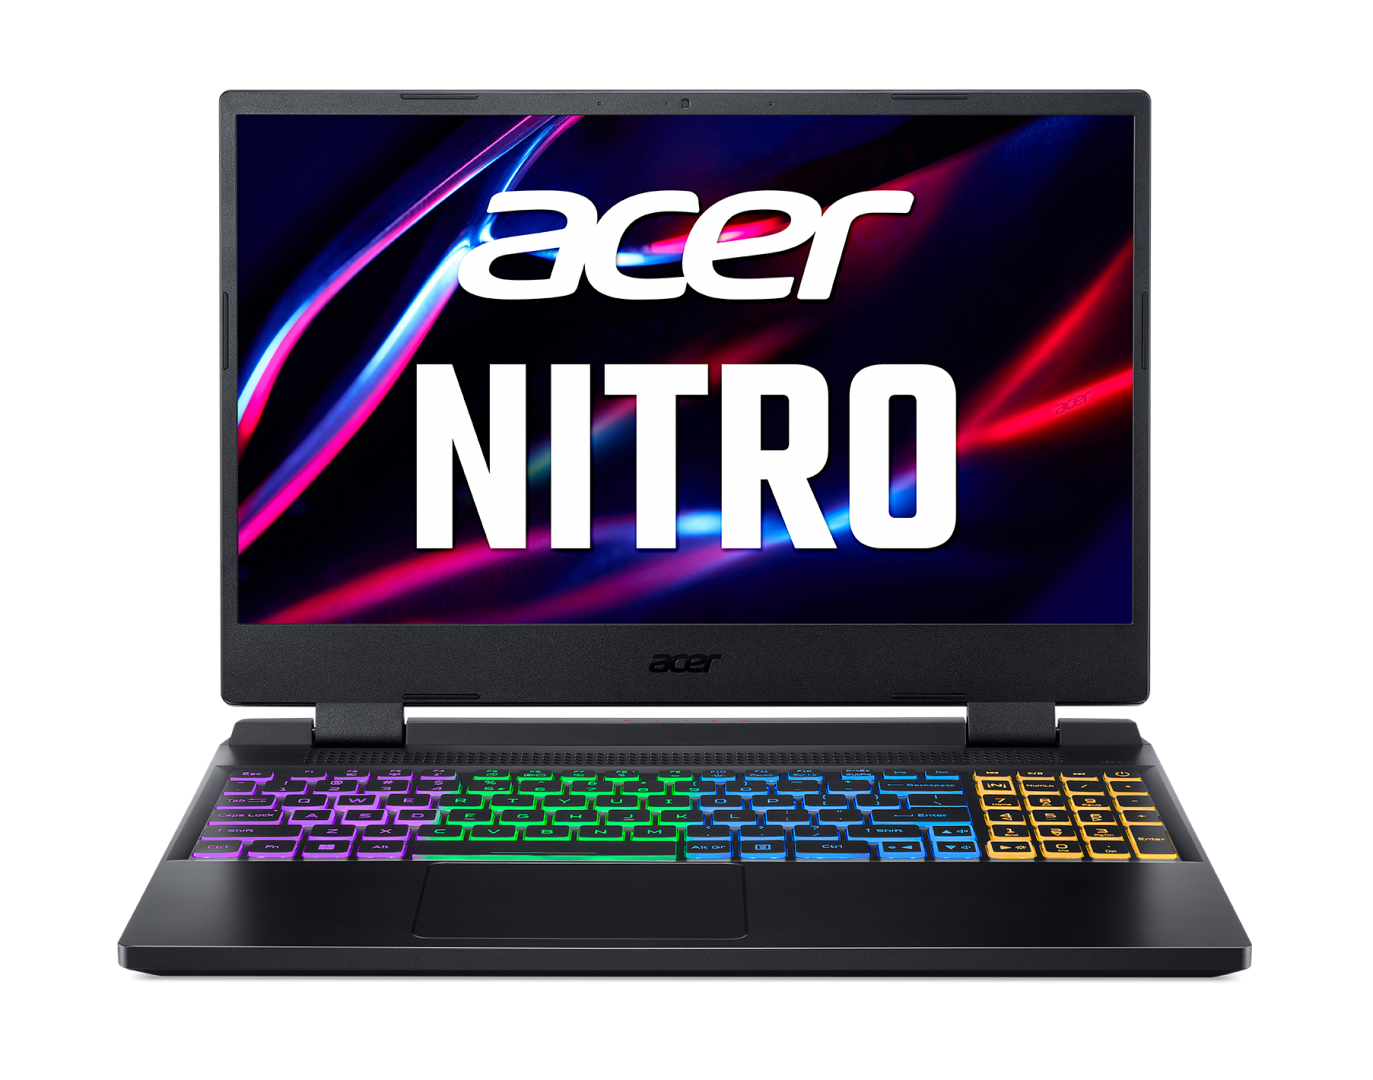 Laptop Acer Gaming Nitro 5 AN515-58, 15.6" display with IPS (In-Plane Switching) technology, Full HD 1920 x 1080, high-brightness (300 nits) Acer ComfyView™ LED-backlit TFT LCD, supporting 144Hz,3 ms Overdrive, 16:9 aspect ratio, NTSC 72%, Wide viewing angle up to 170 degrees, Ultra-slim design